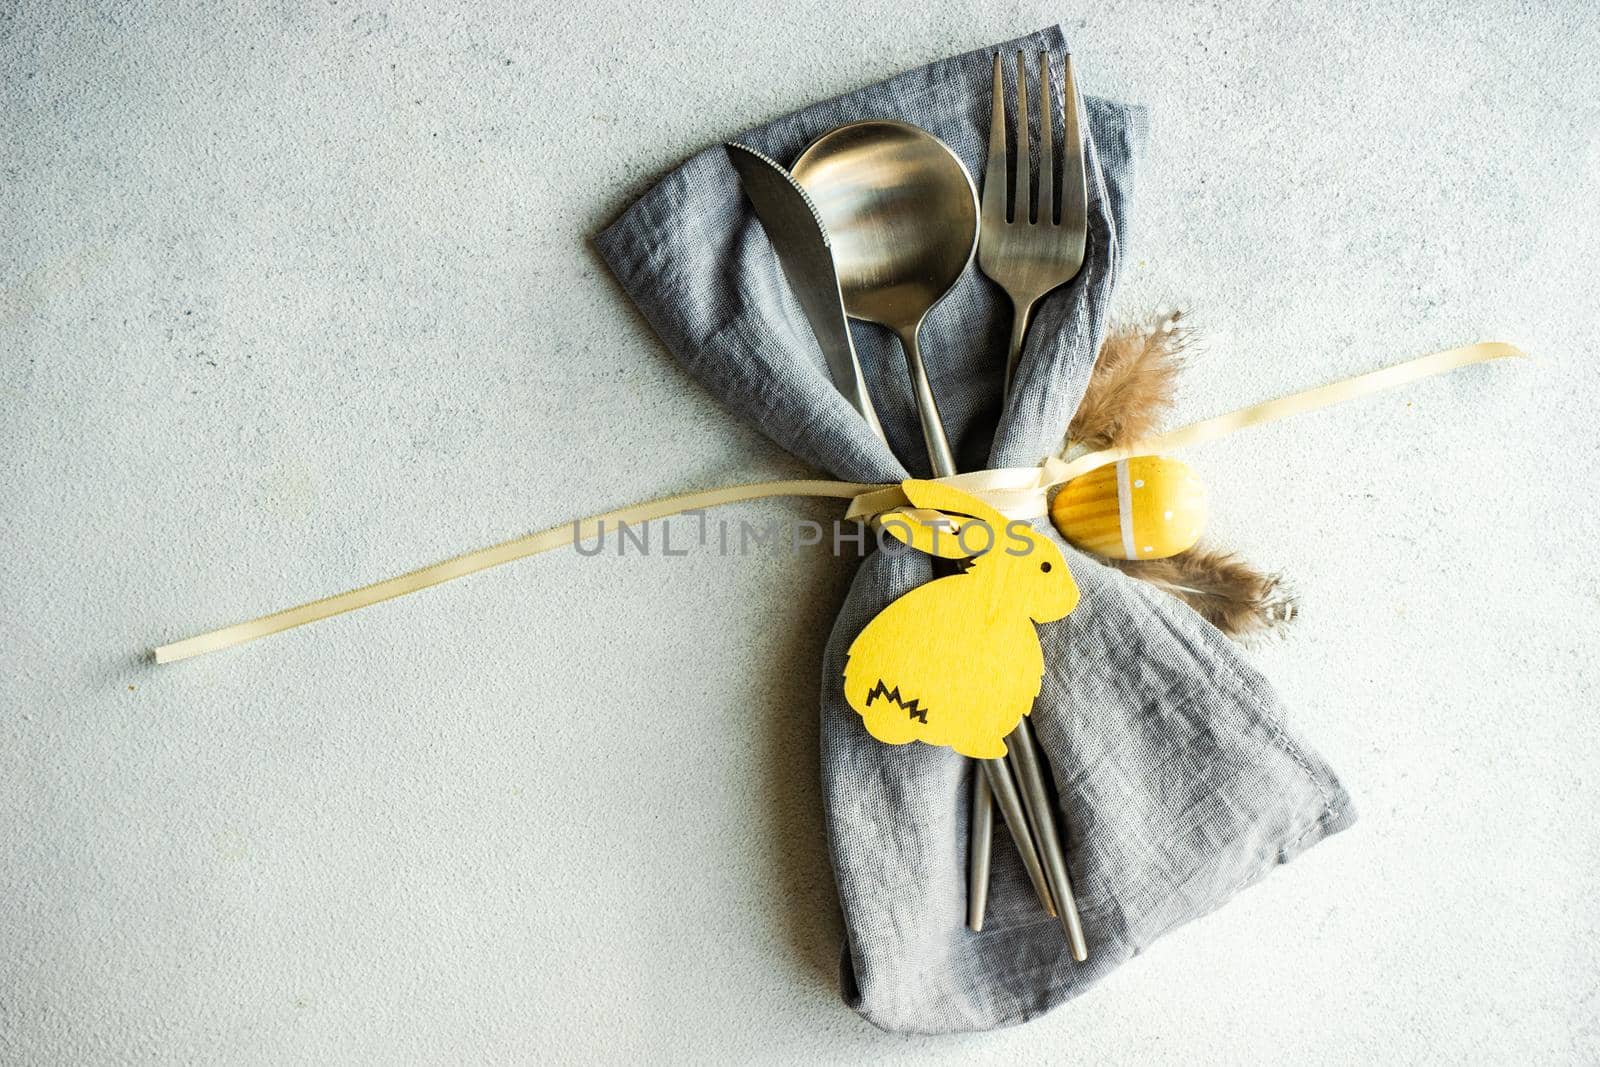 Minimalistic table setting with grey napkin and cutlery decorated with wooden bunny